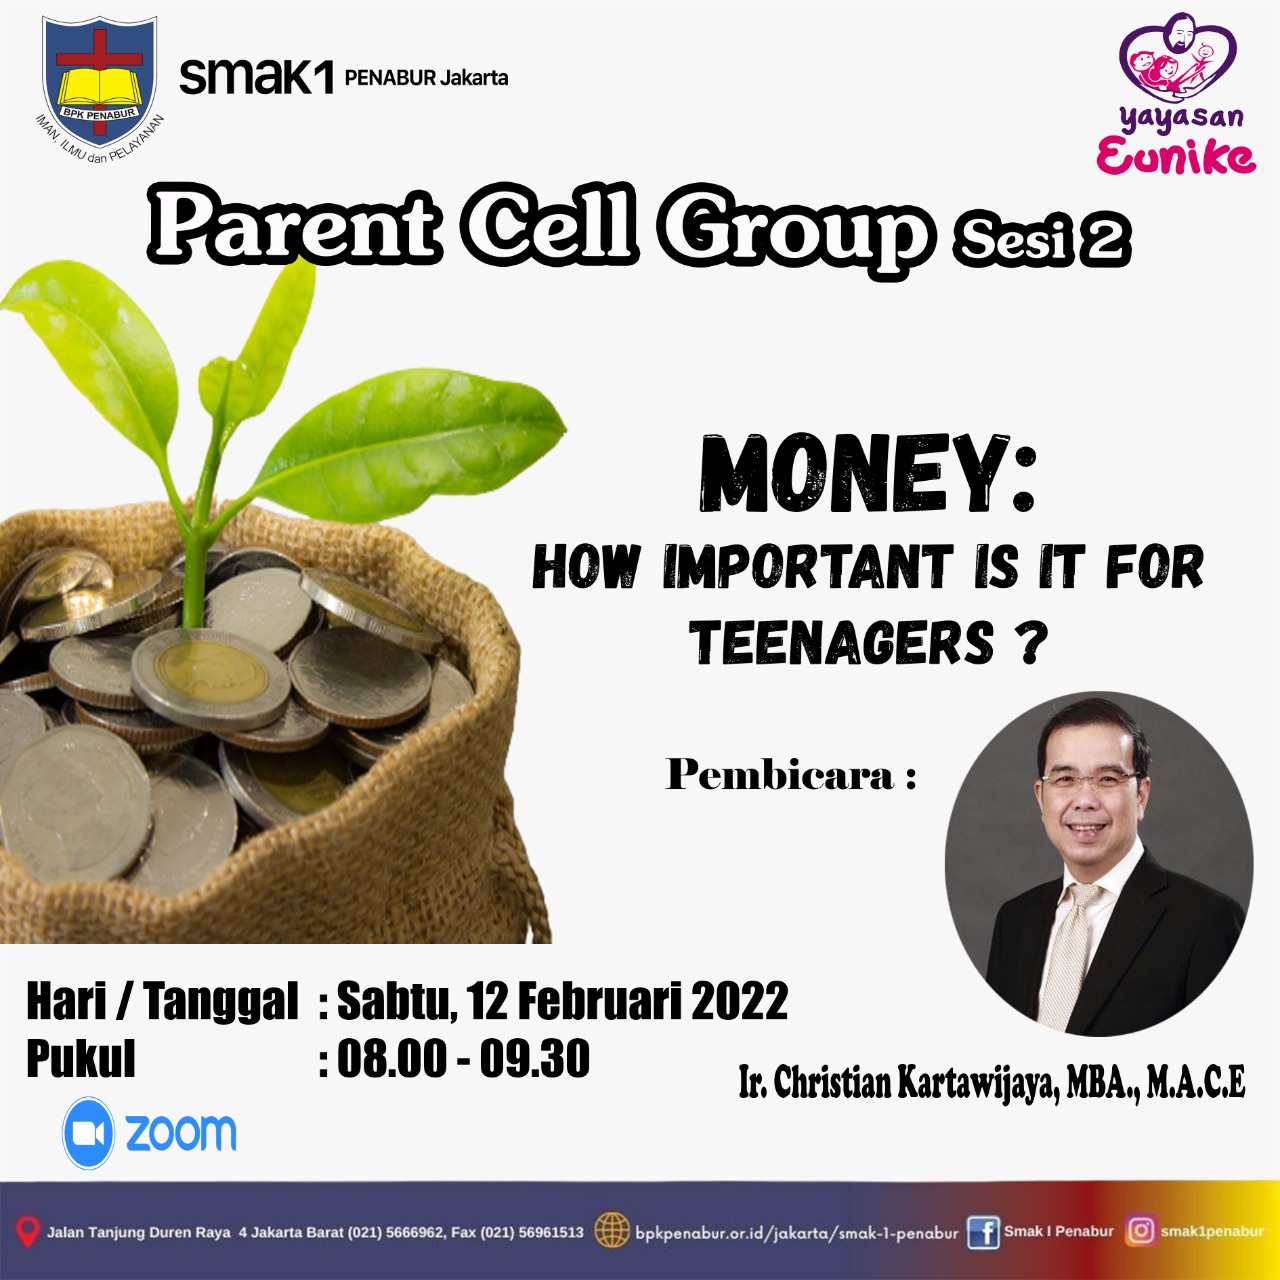 Parent Cell Group sesi 2 dengan tema "Money: How Important is it for teenagers"